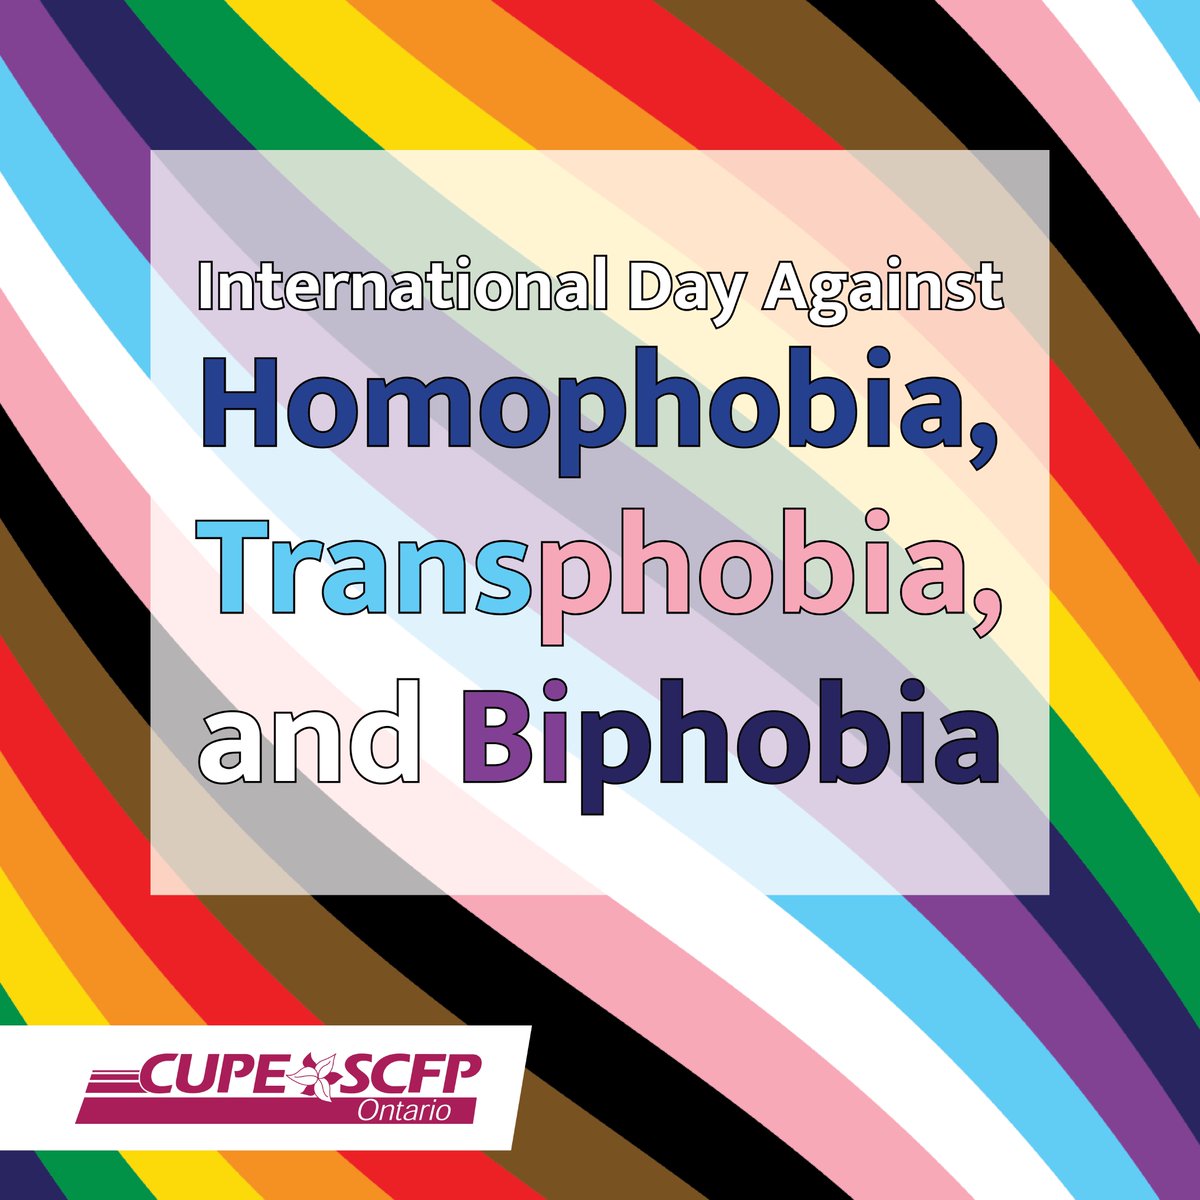 This year’s International Day Against Homophobia, Transphobia, and Biphobia on May 17 falls at the end of the National Rainbow Week of Action, organized by Momentum Canada. 🏳️‍🌈✊🏾 As allies of 2SLGBTQIA+ groups and individuals, we understand that when one group is targeted, we are